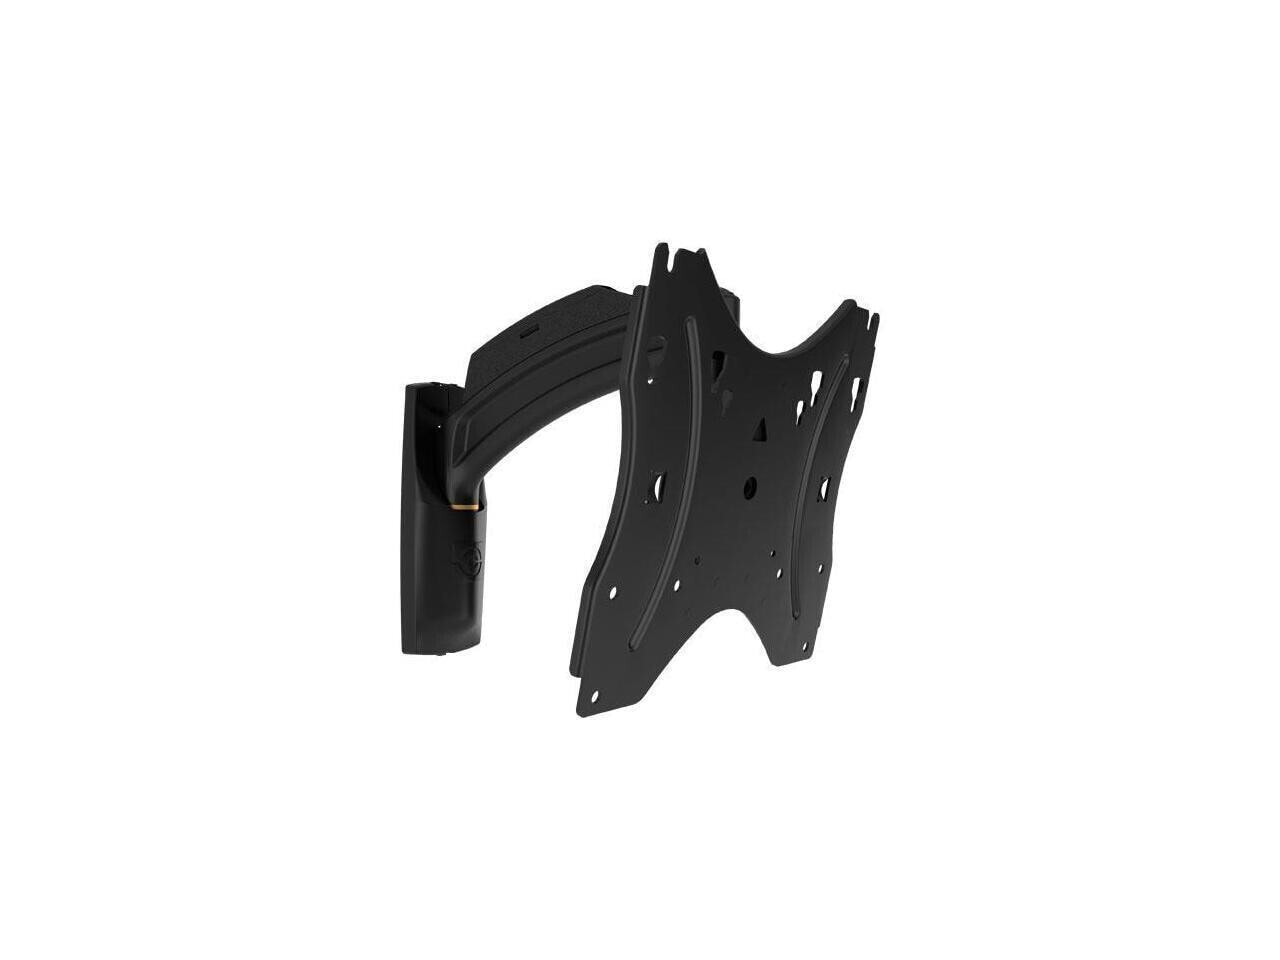 SMALL THINSTALL SINGLE SWING ARM WALL MOUNT - 10 EXTENSION